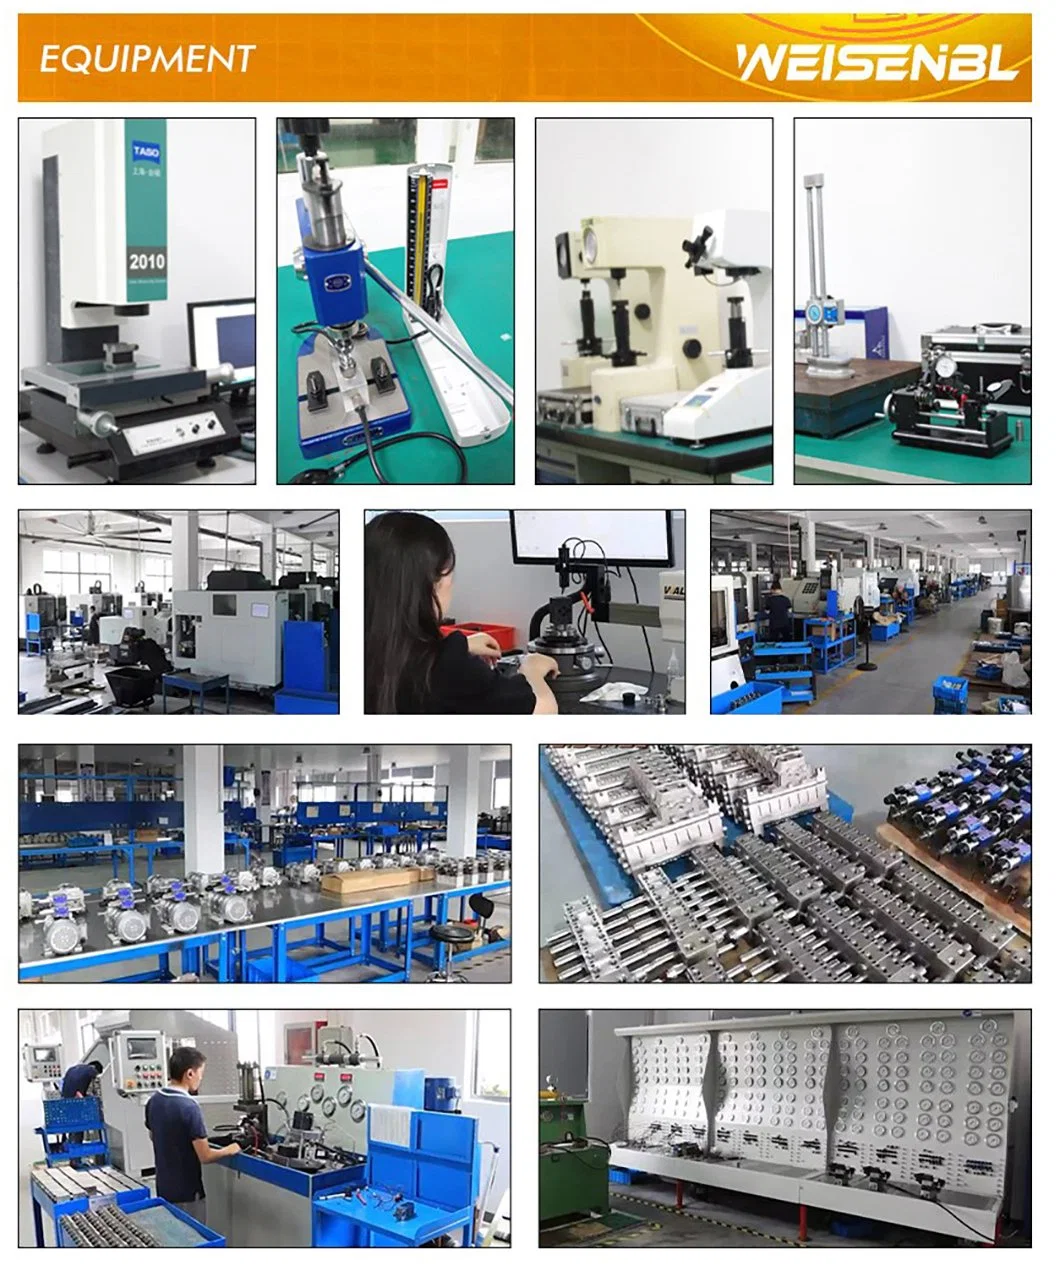 Industry Leading Multiple Repurchase Durable Factory Outlet Hot Sale New-Style Hydraulic Lock